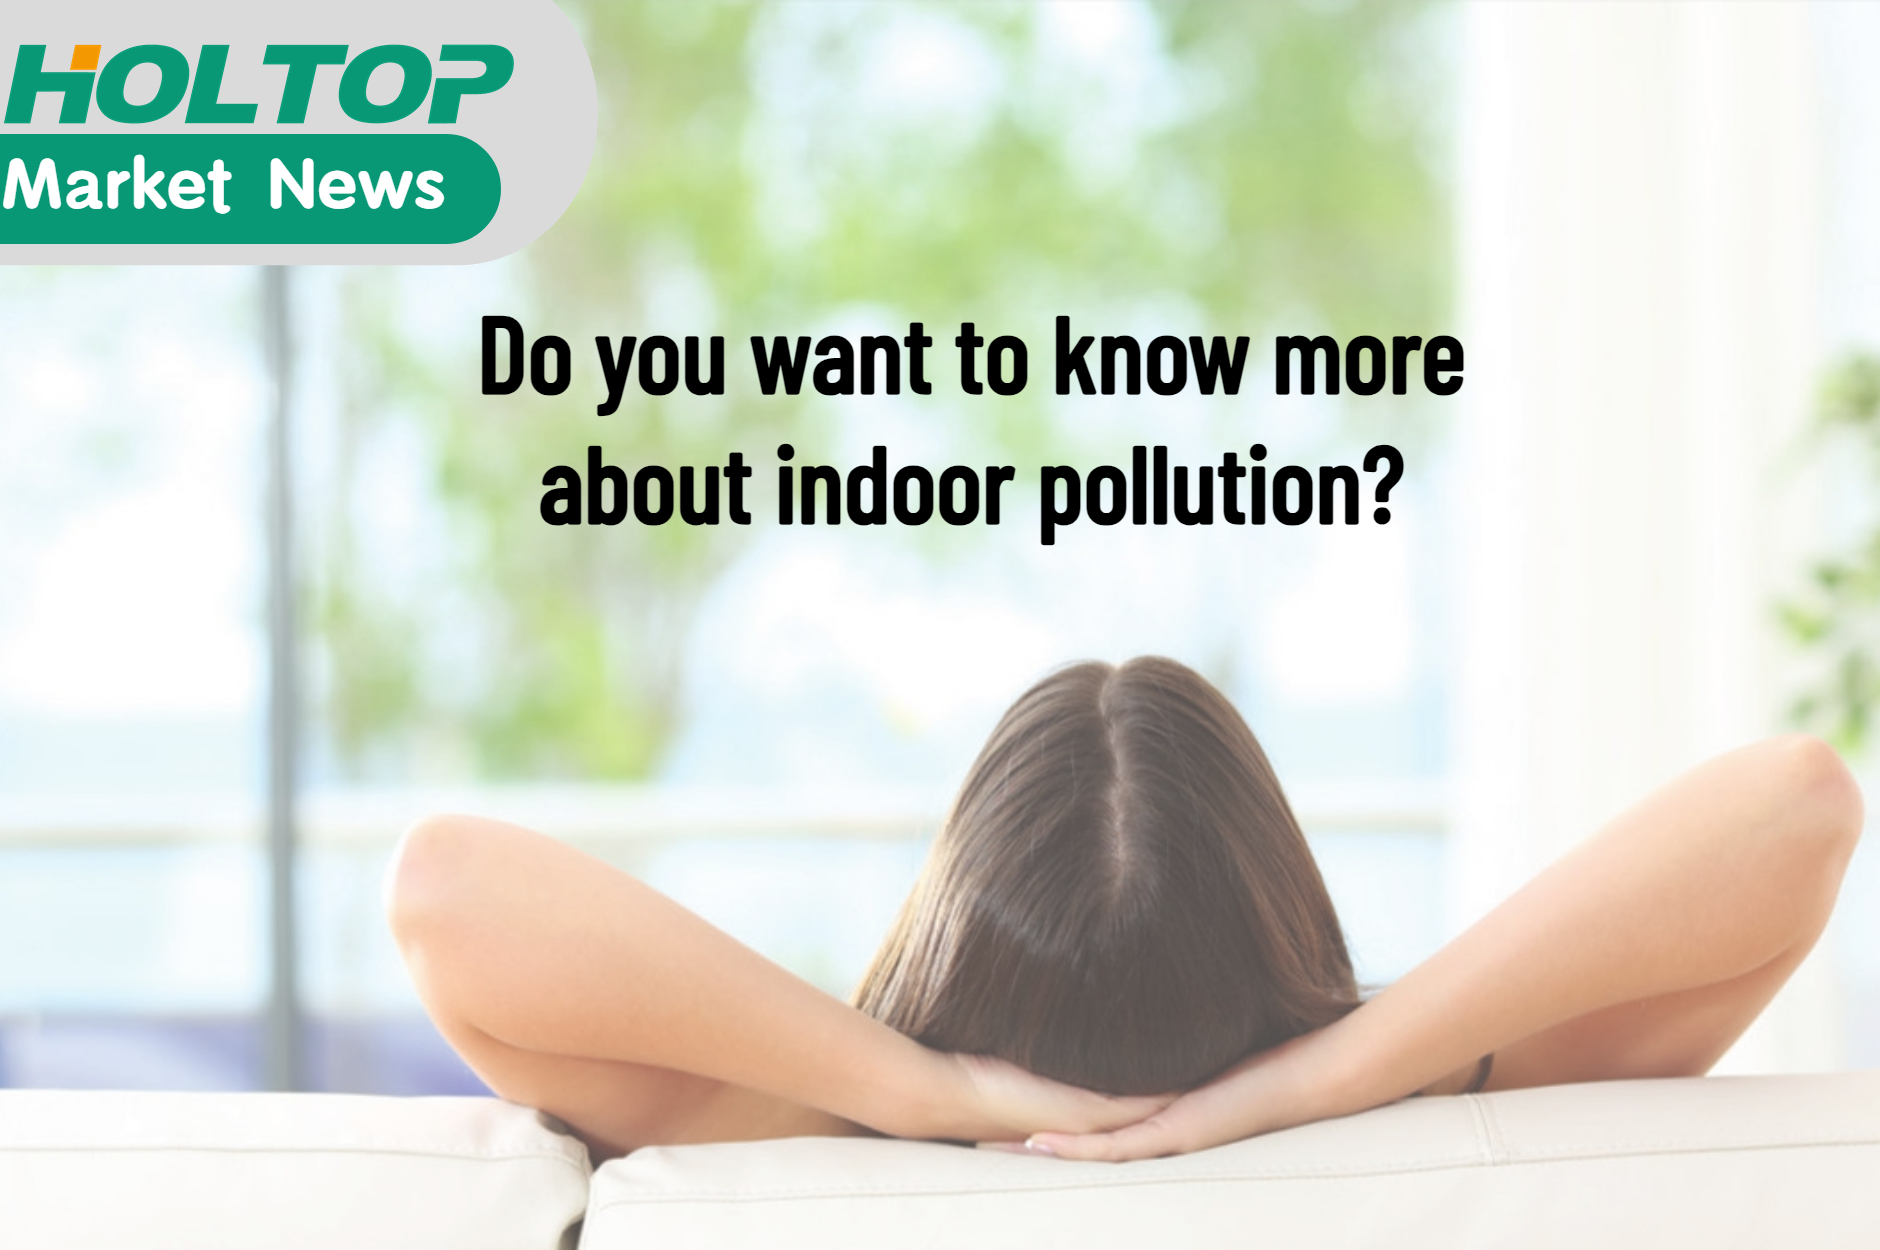 Do you want to know more about indoor pollution